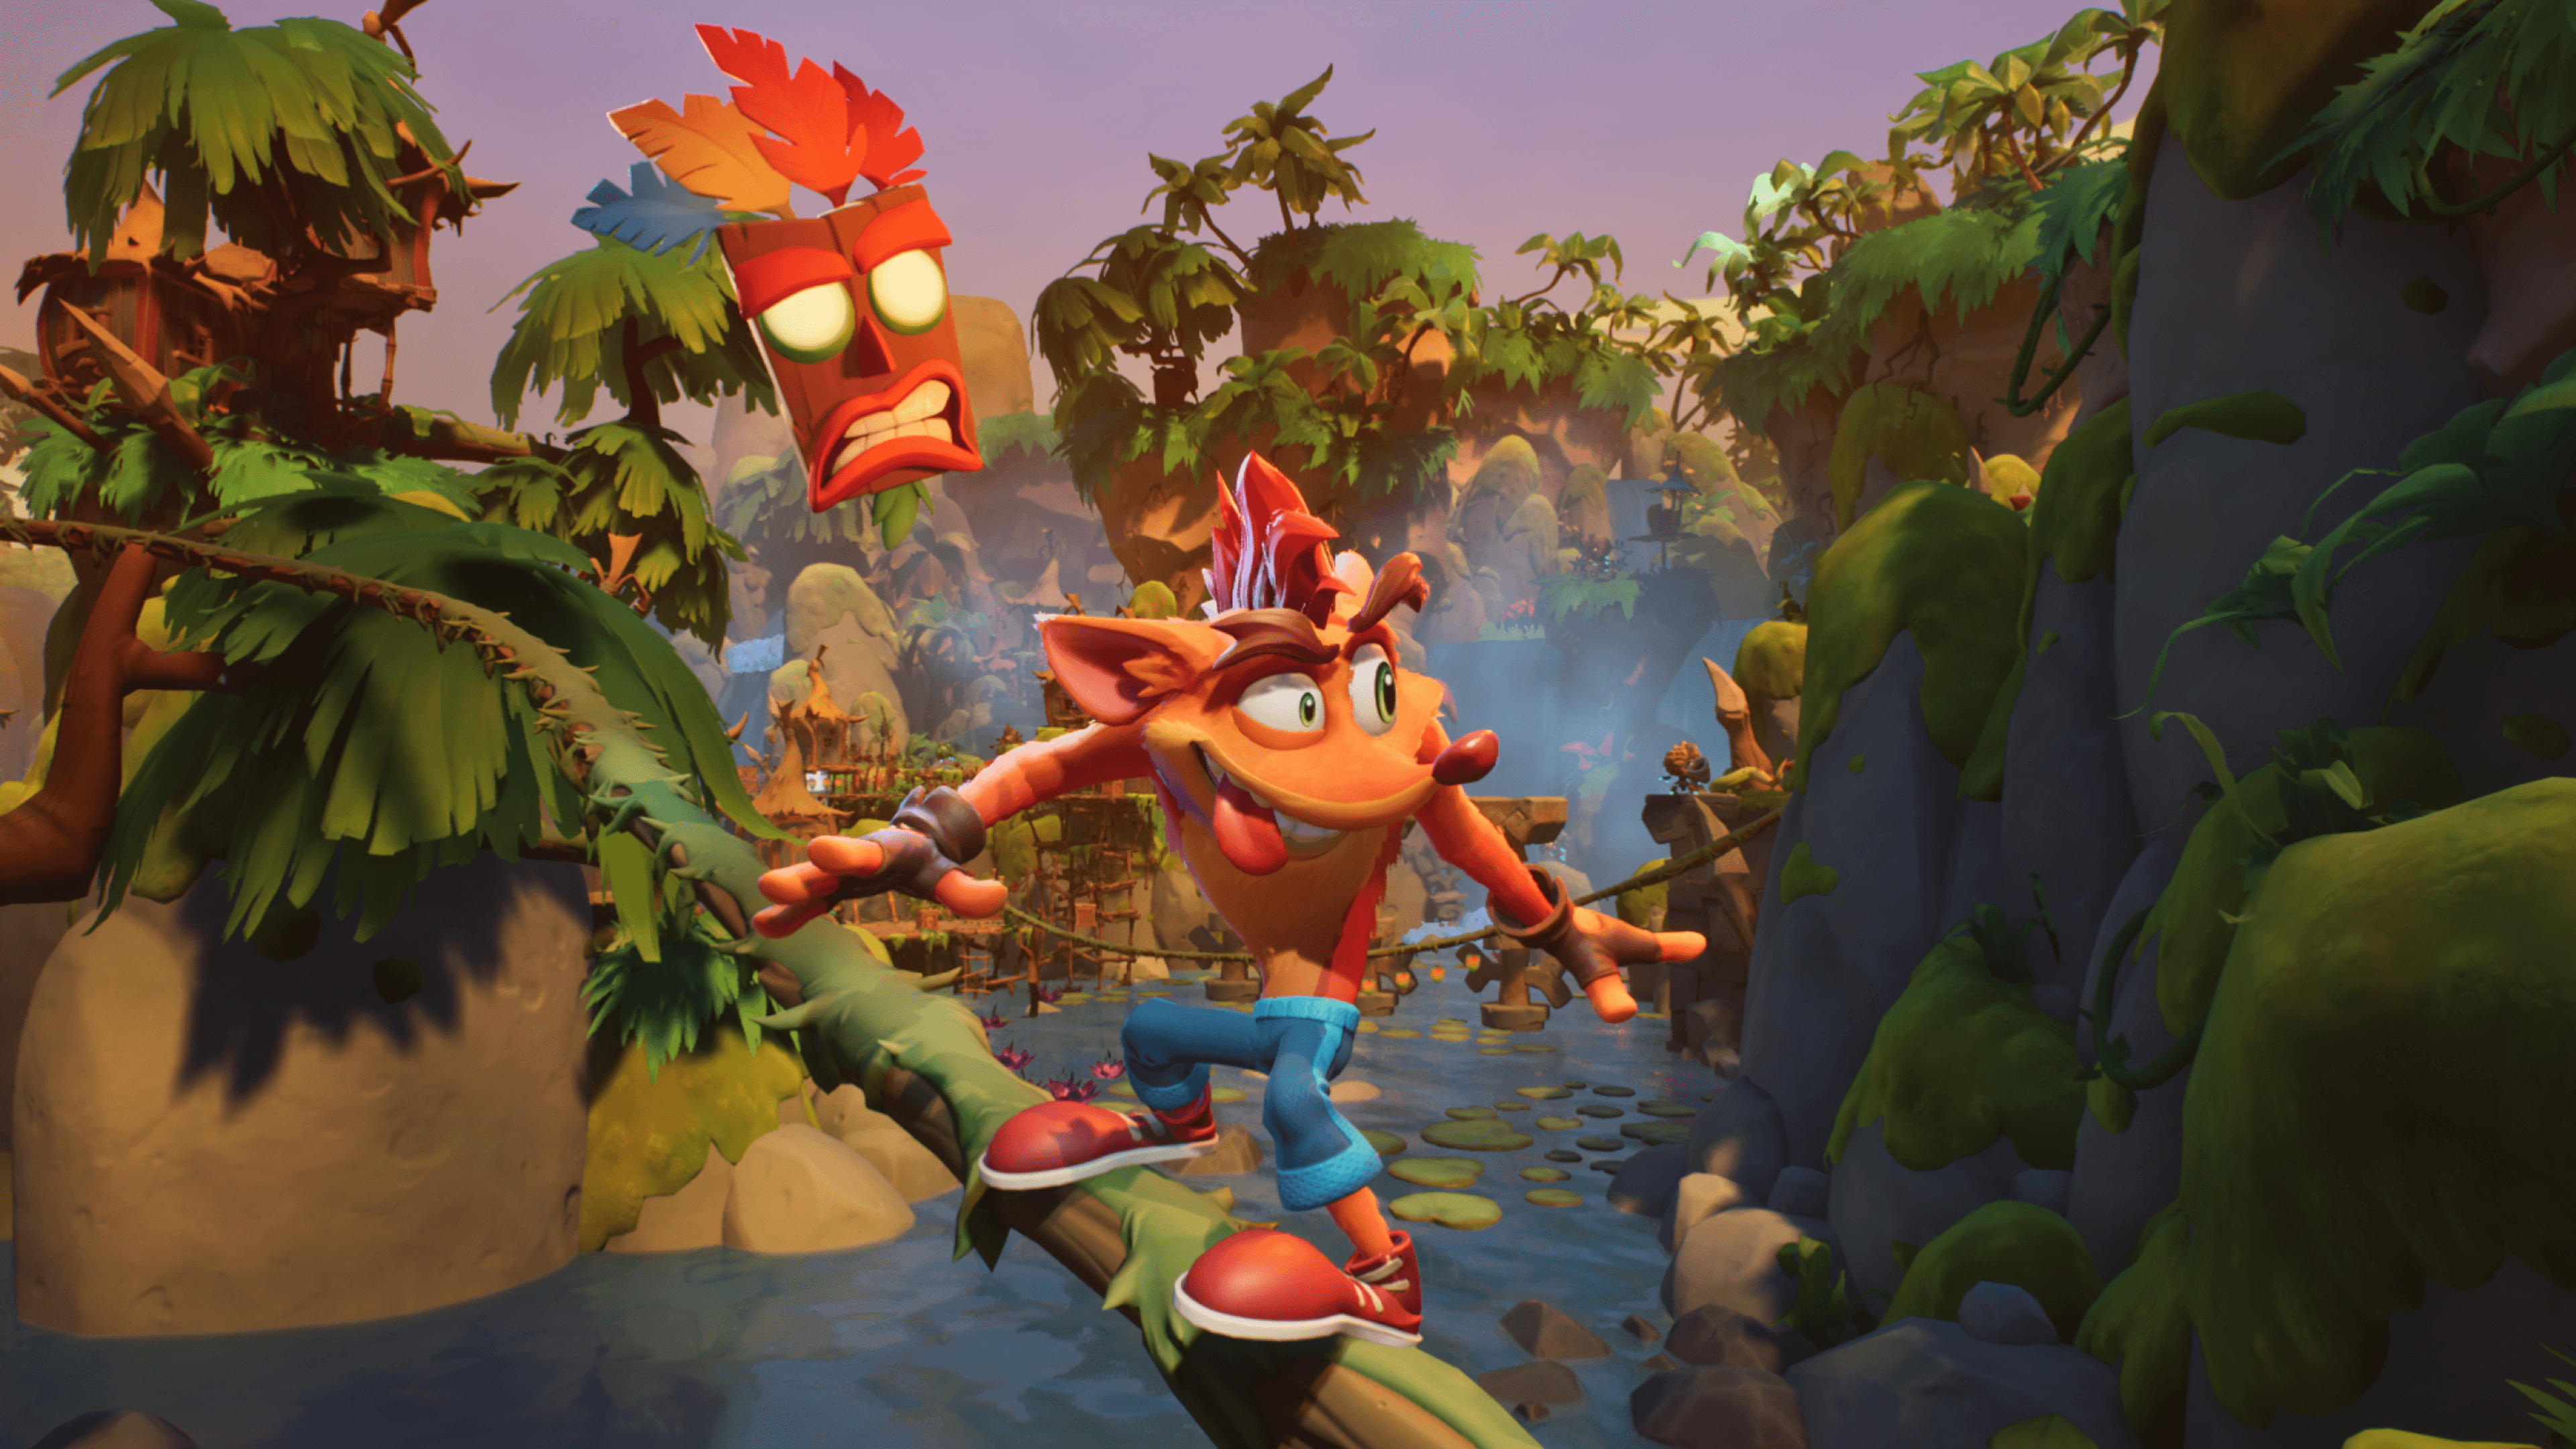 Where To Buy 'Crash Bandicoot 4: It's About Time' For PS4 & Xbox One In The UK